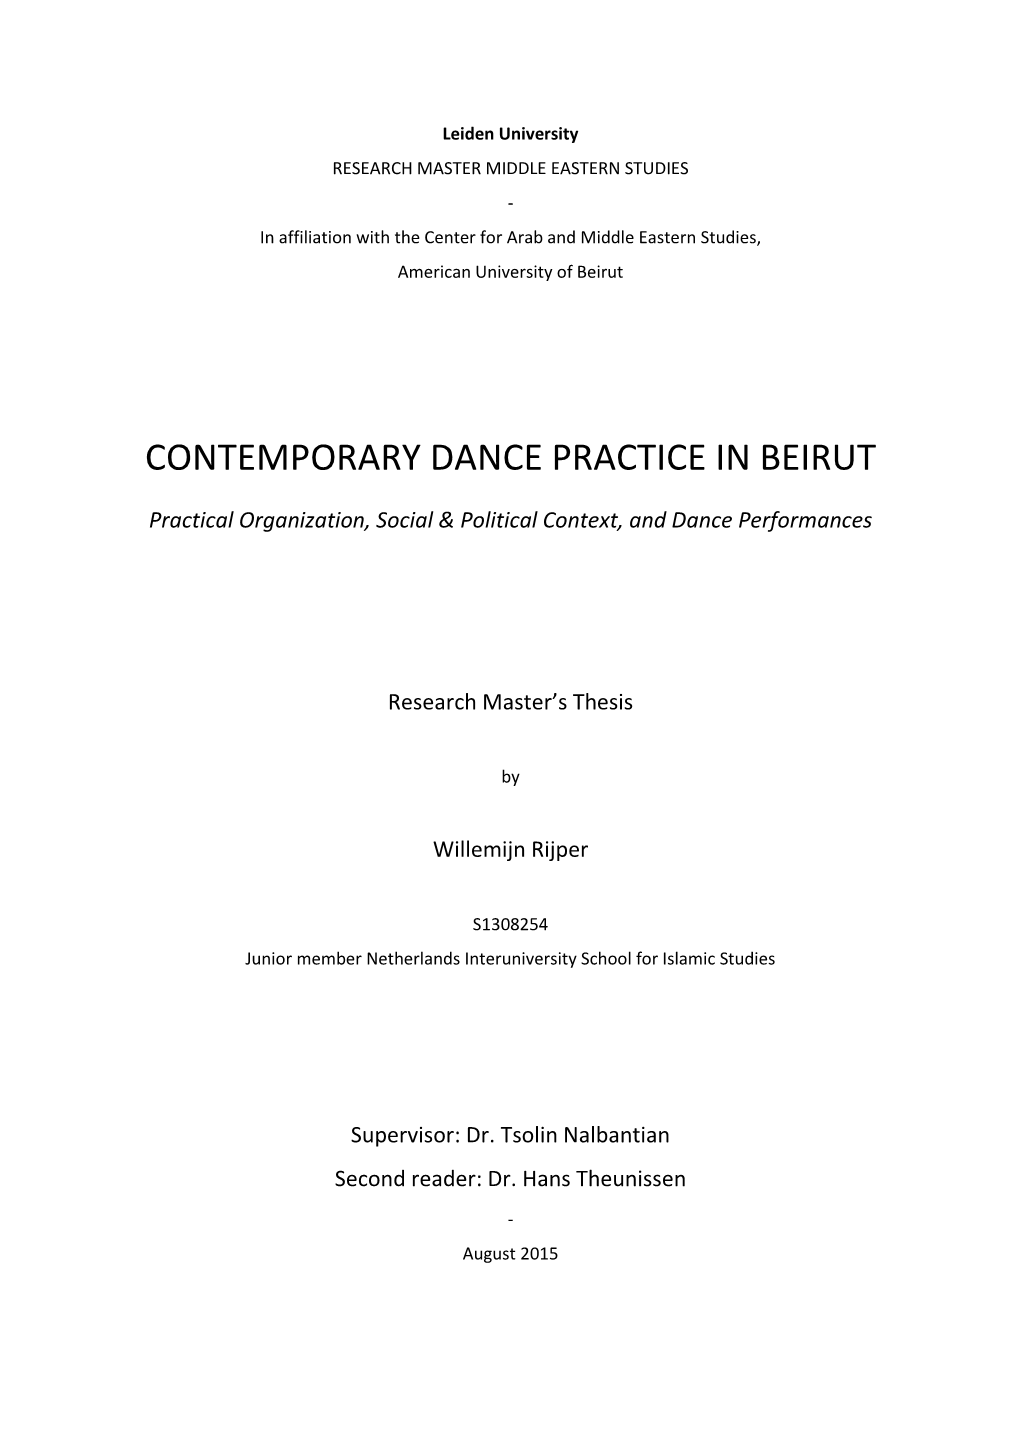 Contemporary Dance Practice in Beirut